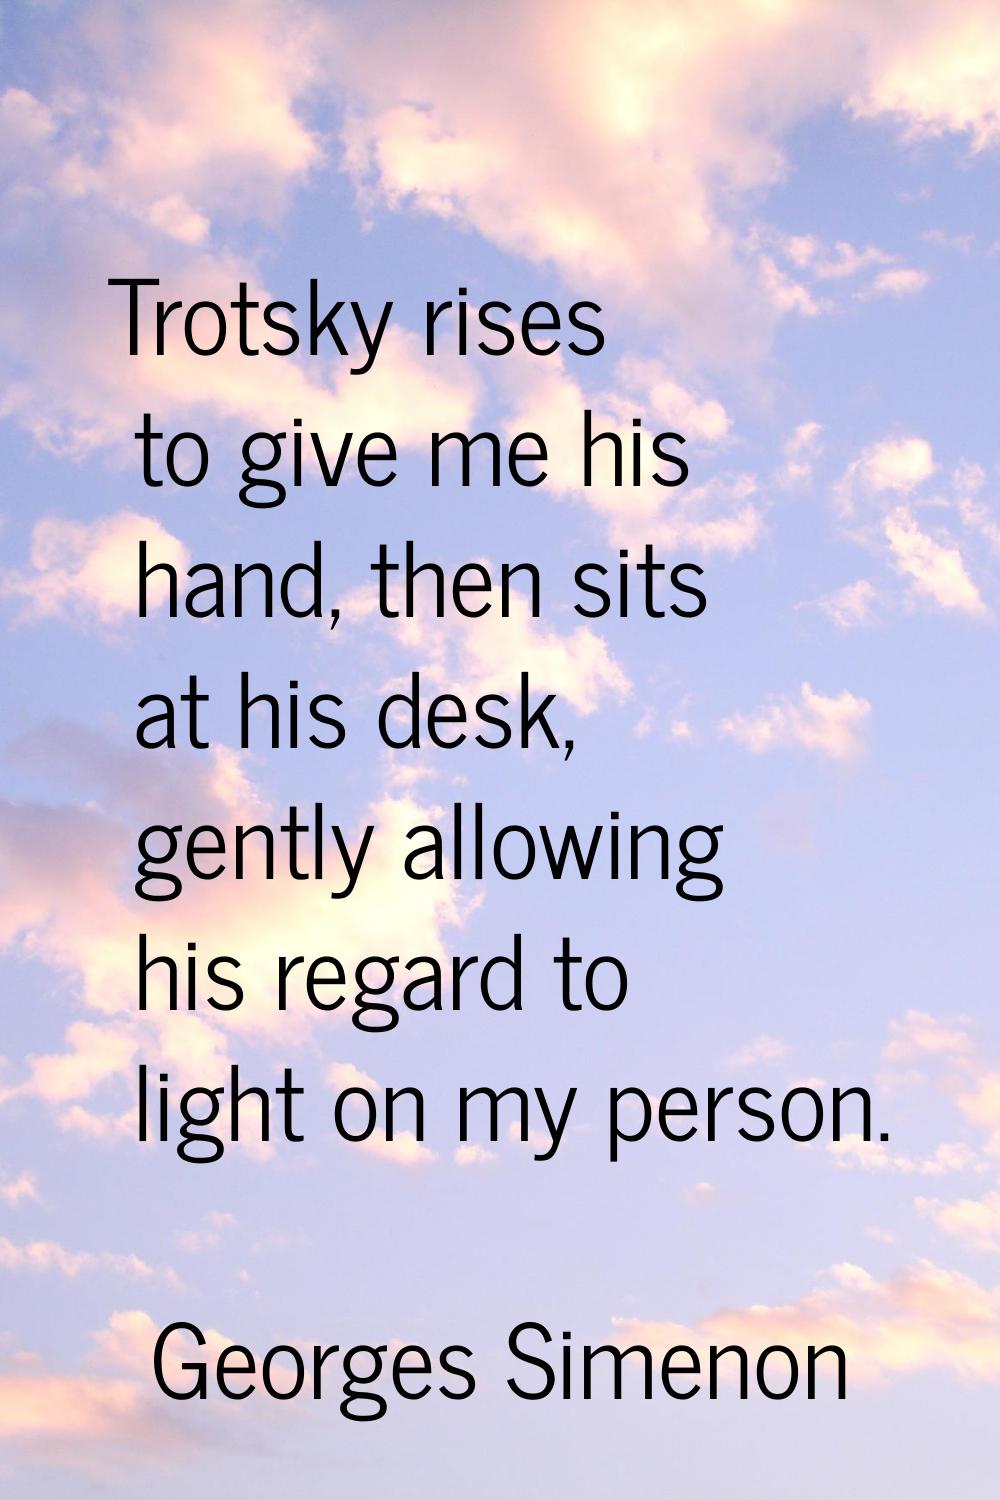 Trotsky rises to give me his hand, then sits at his desk, gently allowing his regard to light on my